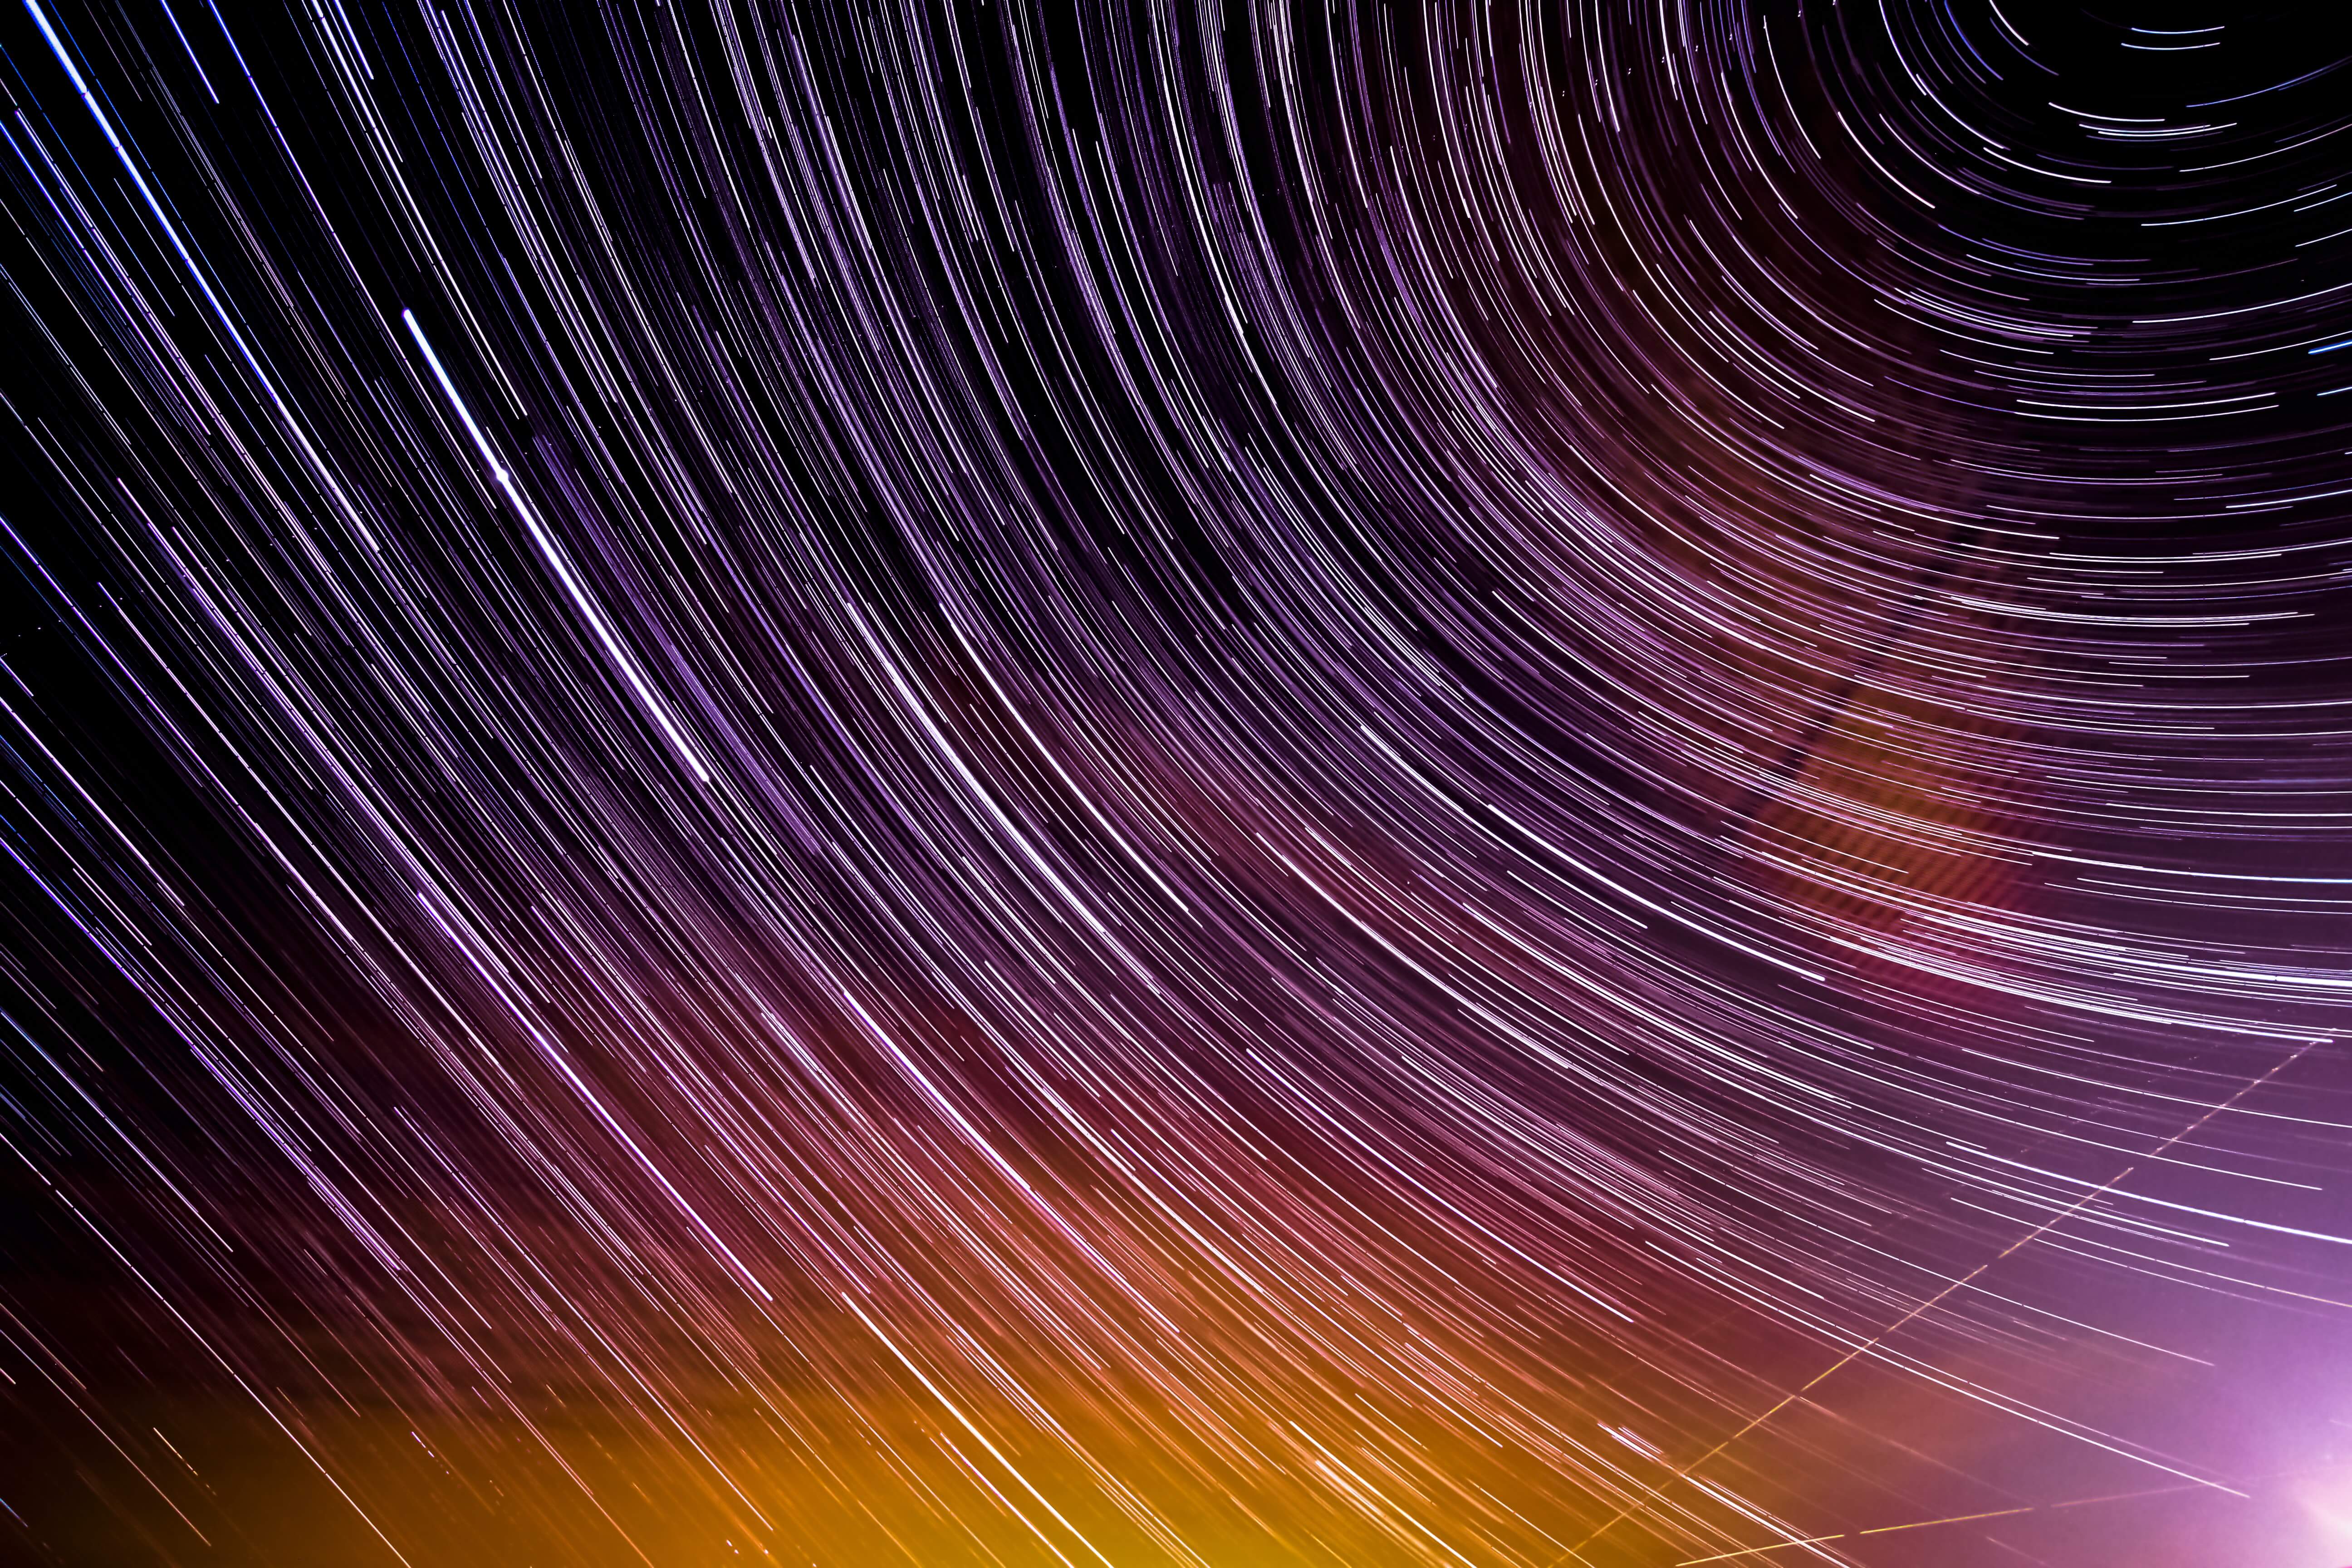 A time-lapse photo of stars